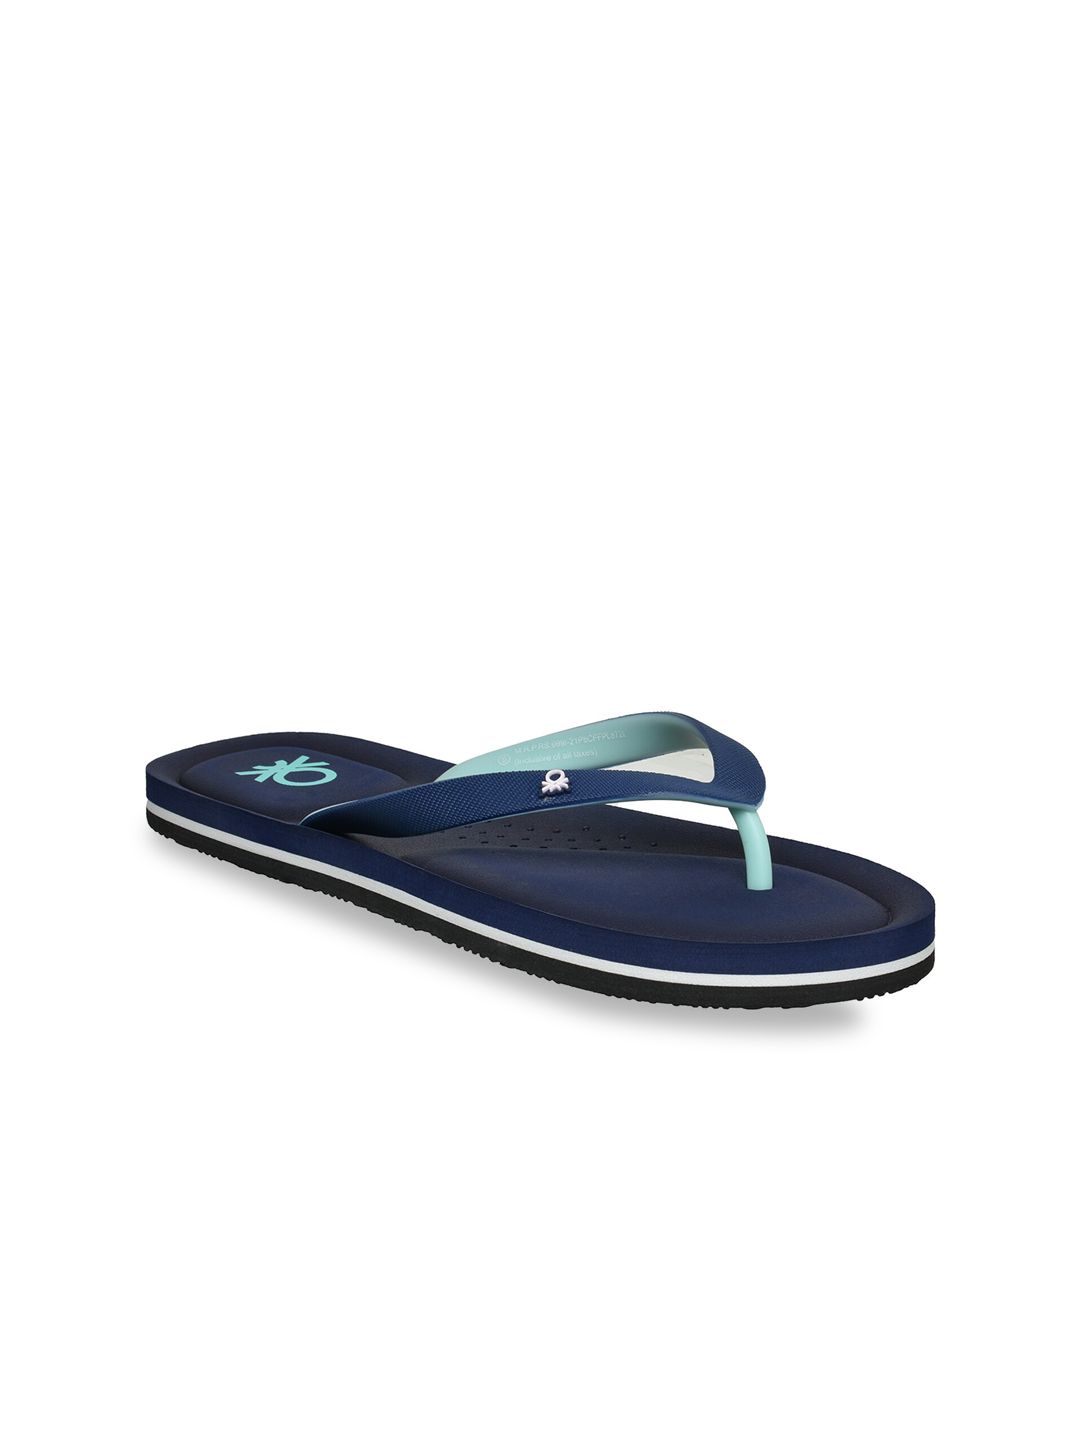 United Colors of Benetton Women Navy Blue Rubber Thong Flip-Flops Price in India